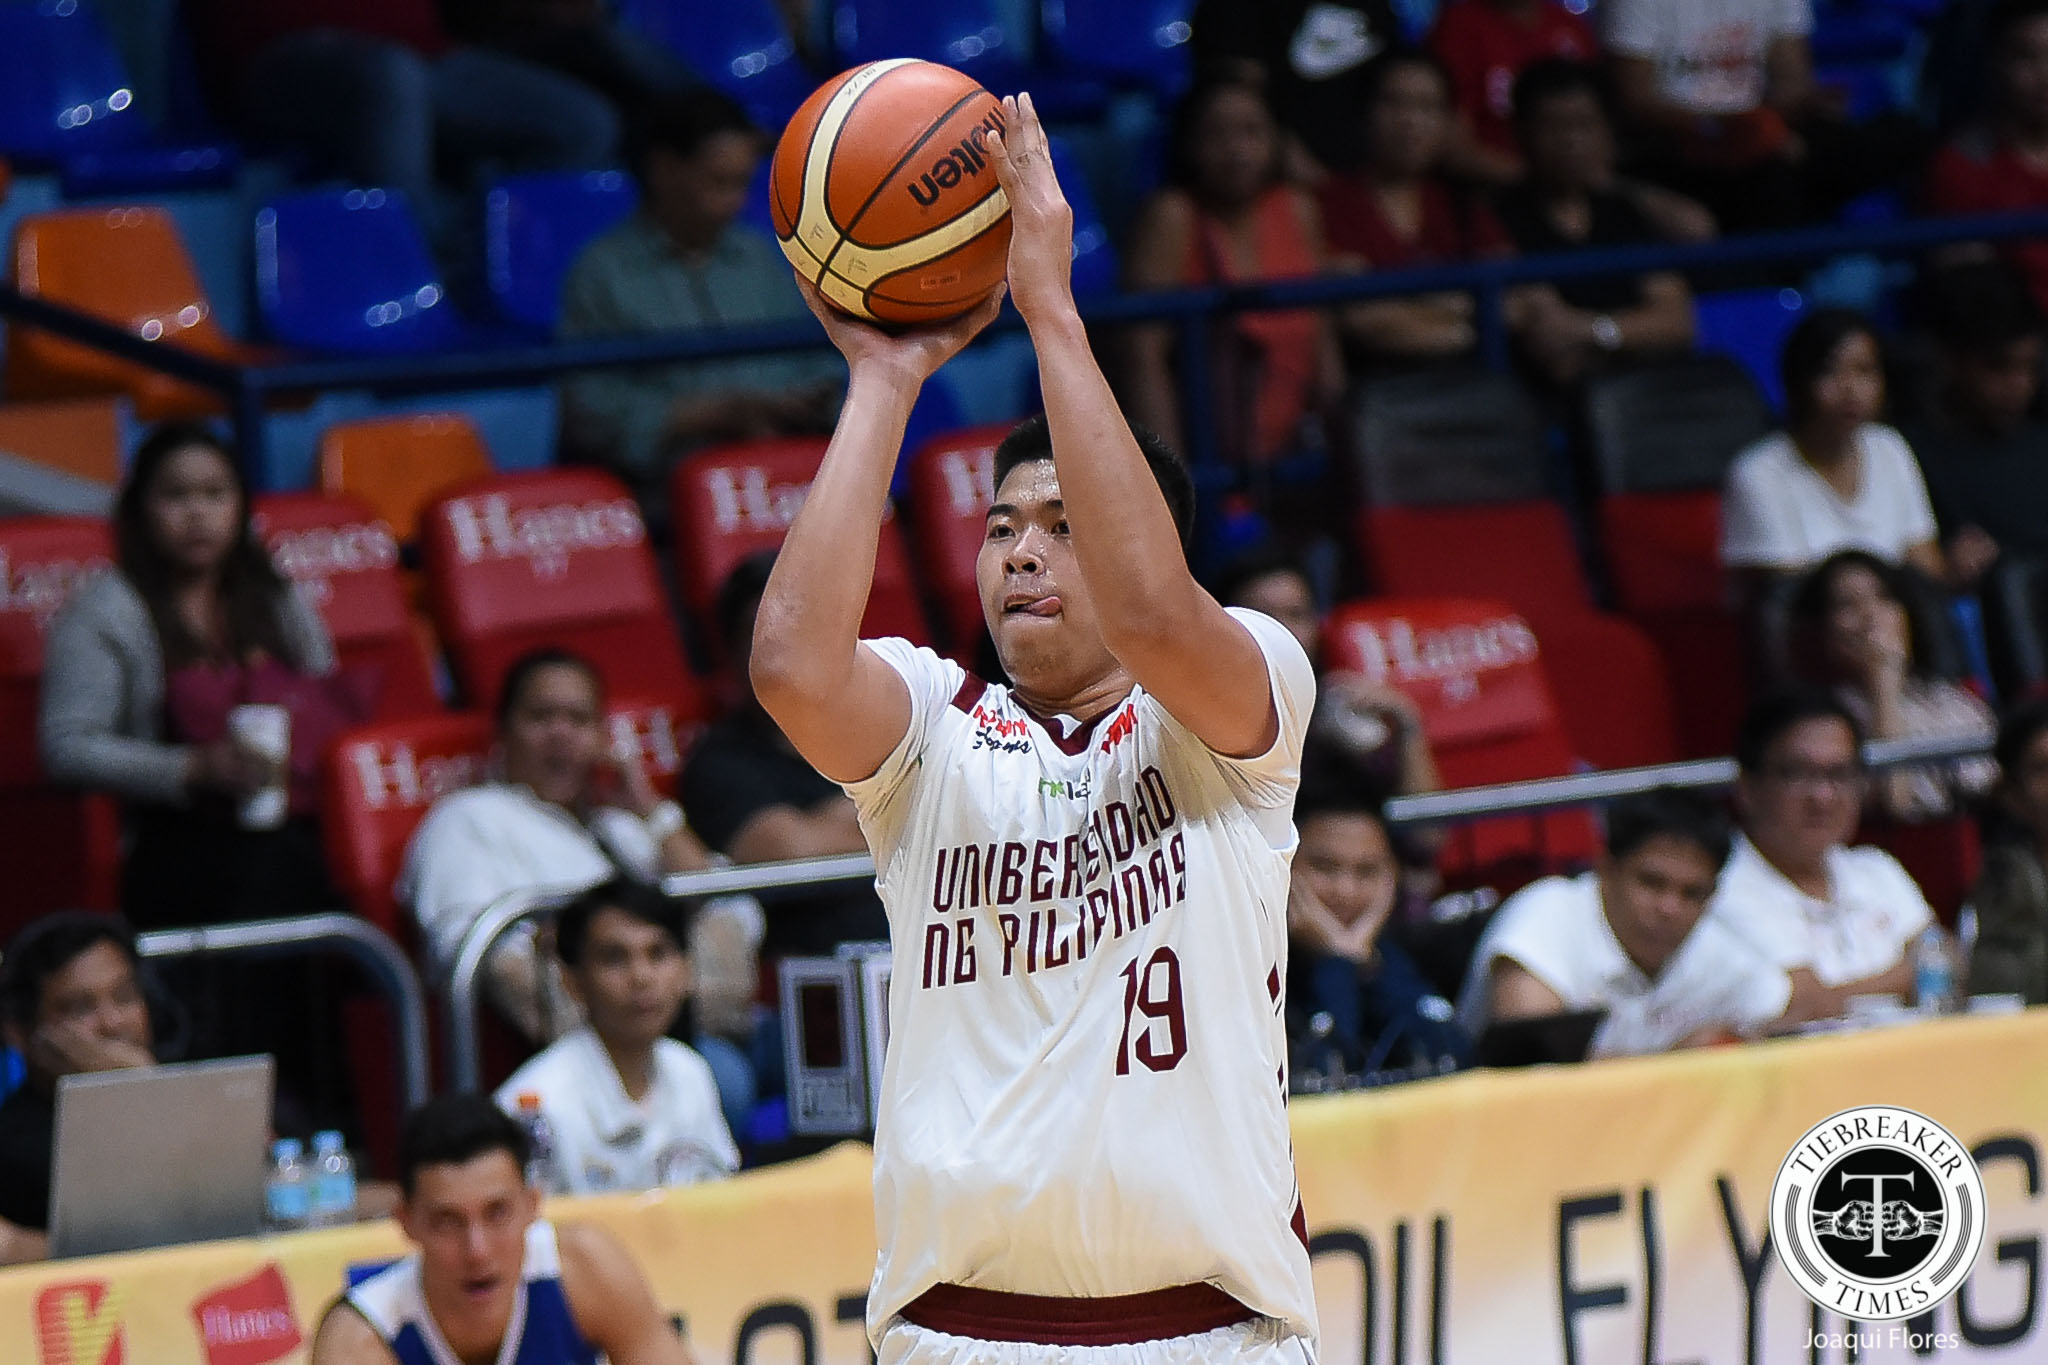 Filoil-2018-Gilas-Cadets-vs.-UP-Gozum-6817 Will Gozum makes up for lost time with Nueva Ecija Basketball CSB MPBL News  - philippine sports news